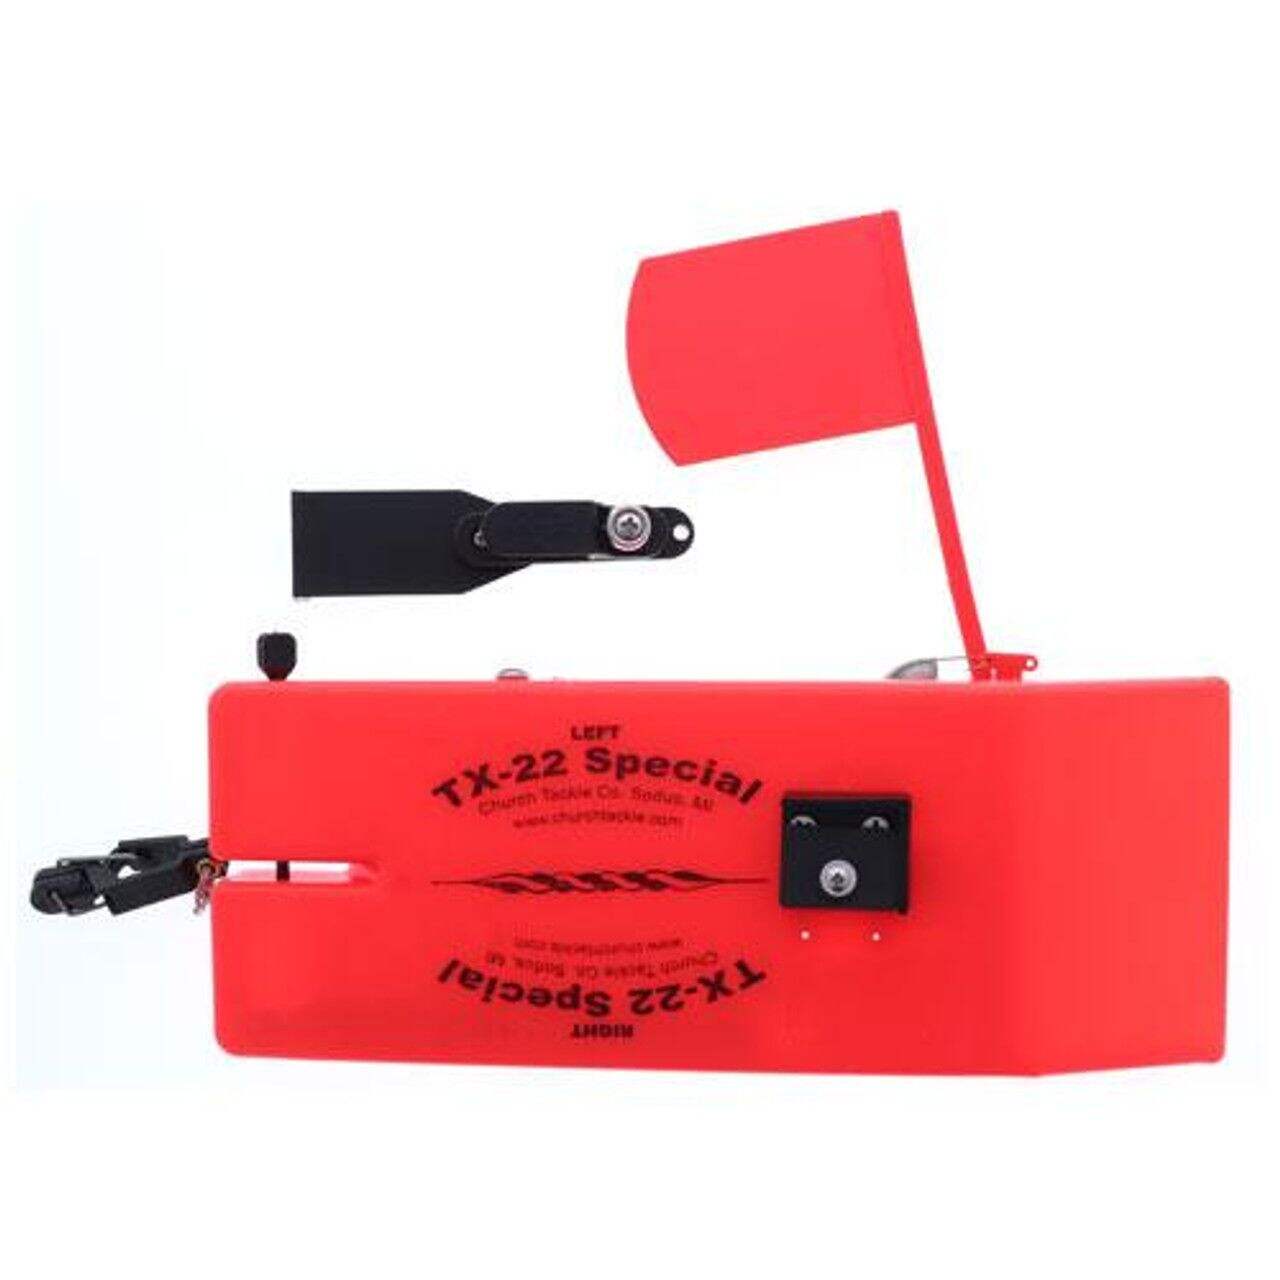 Church Tackle TX-22 Special Inline Planer Board, Model # 30350